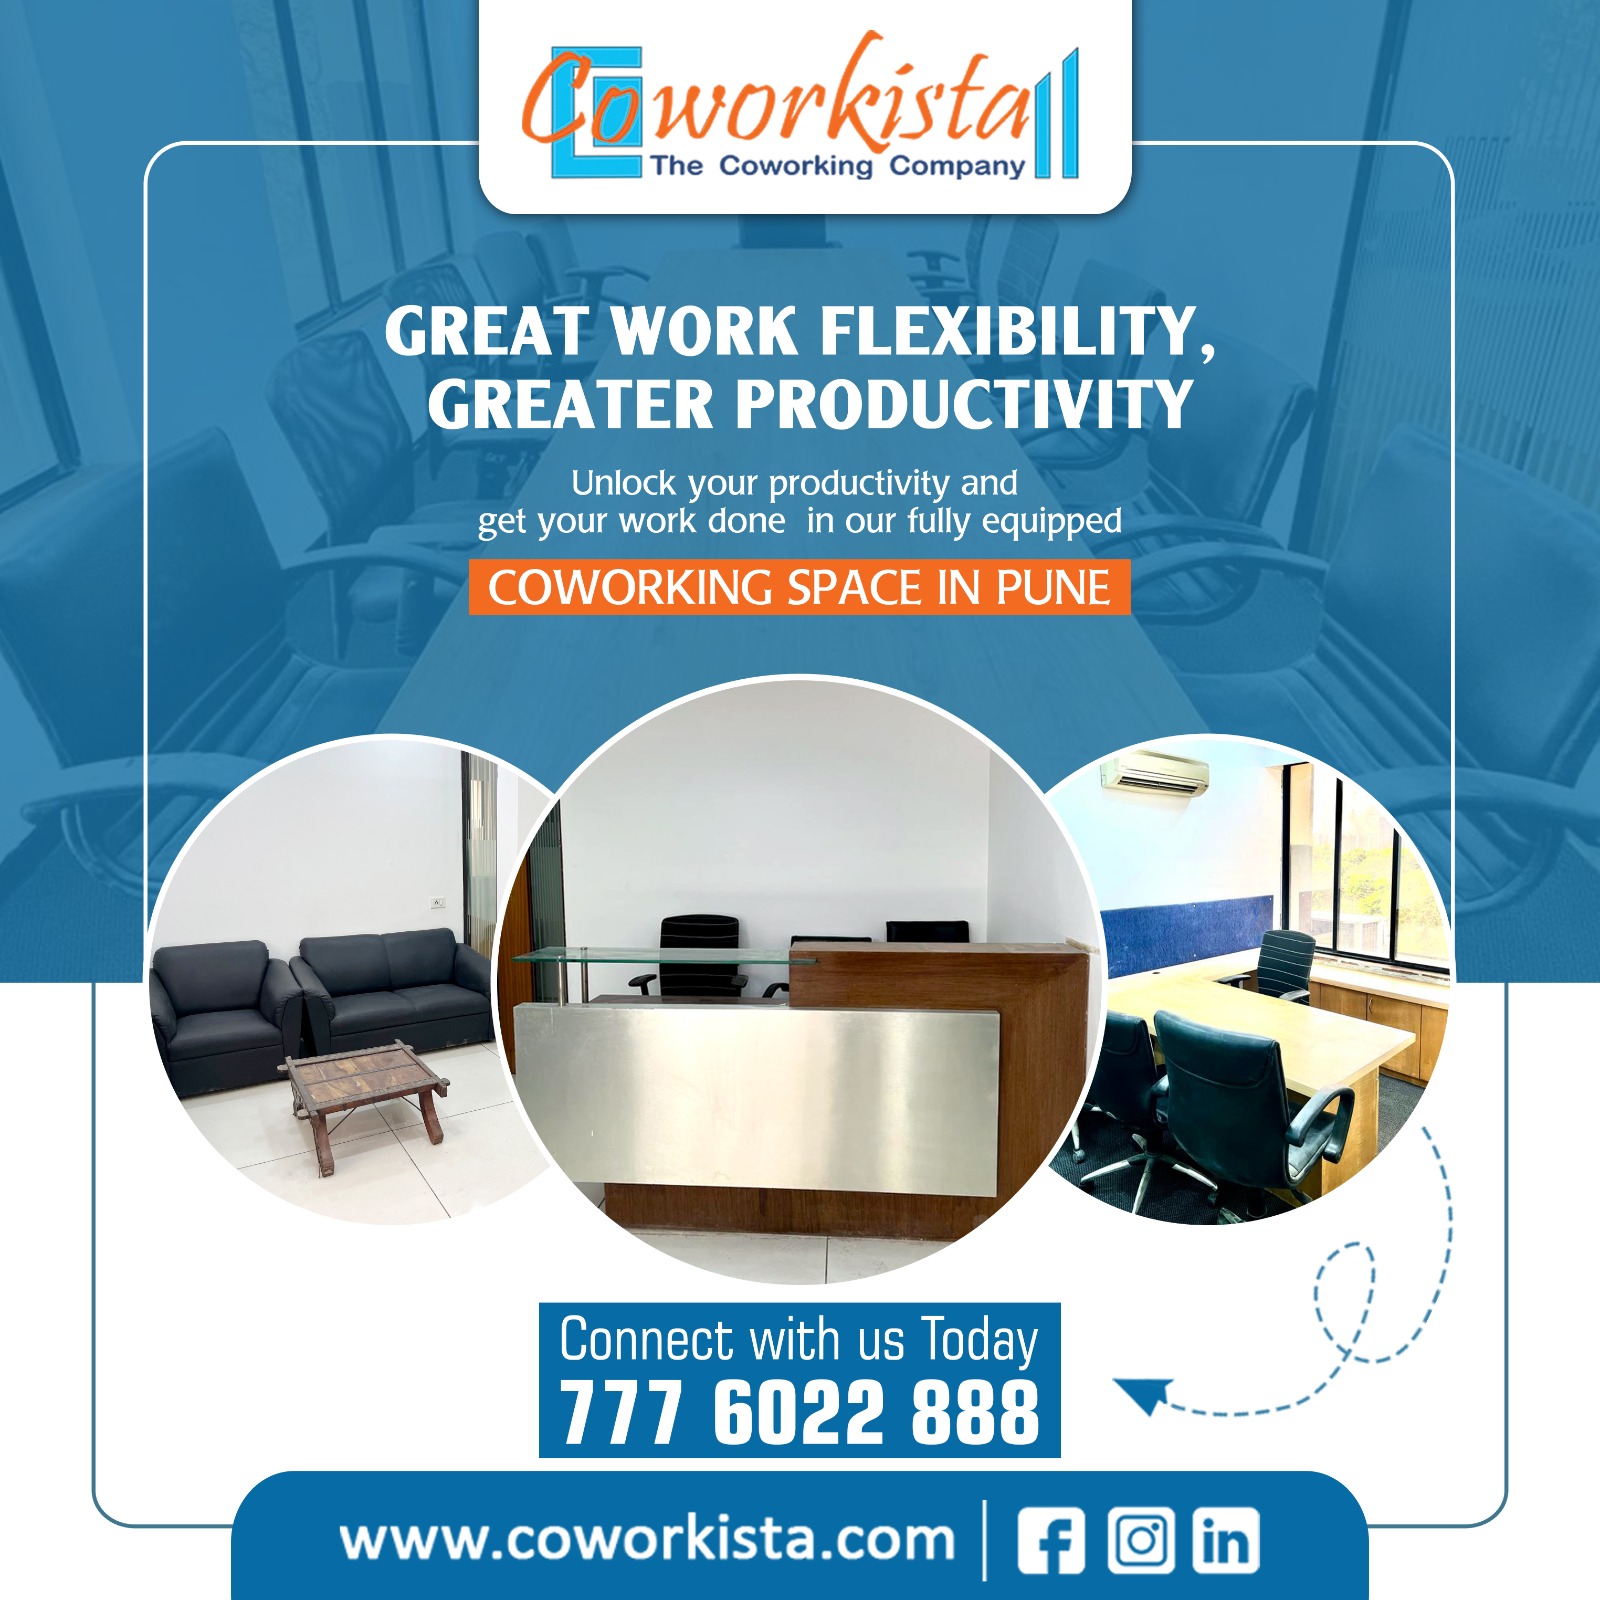 Coworkista - Coworking Space in Pune and Shared Office Space